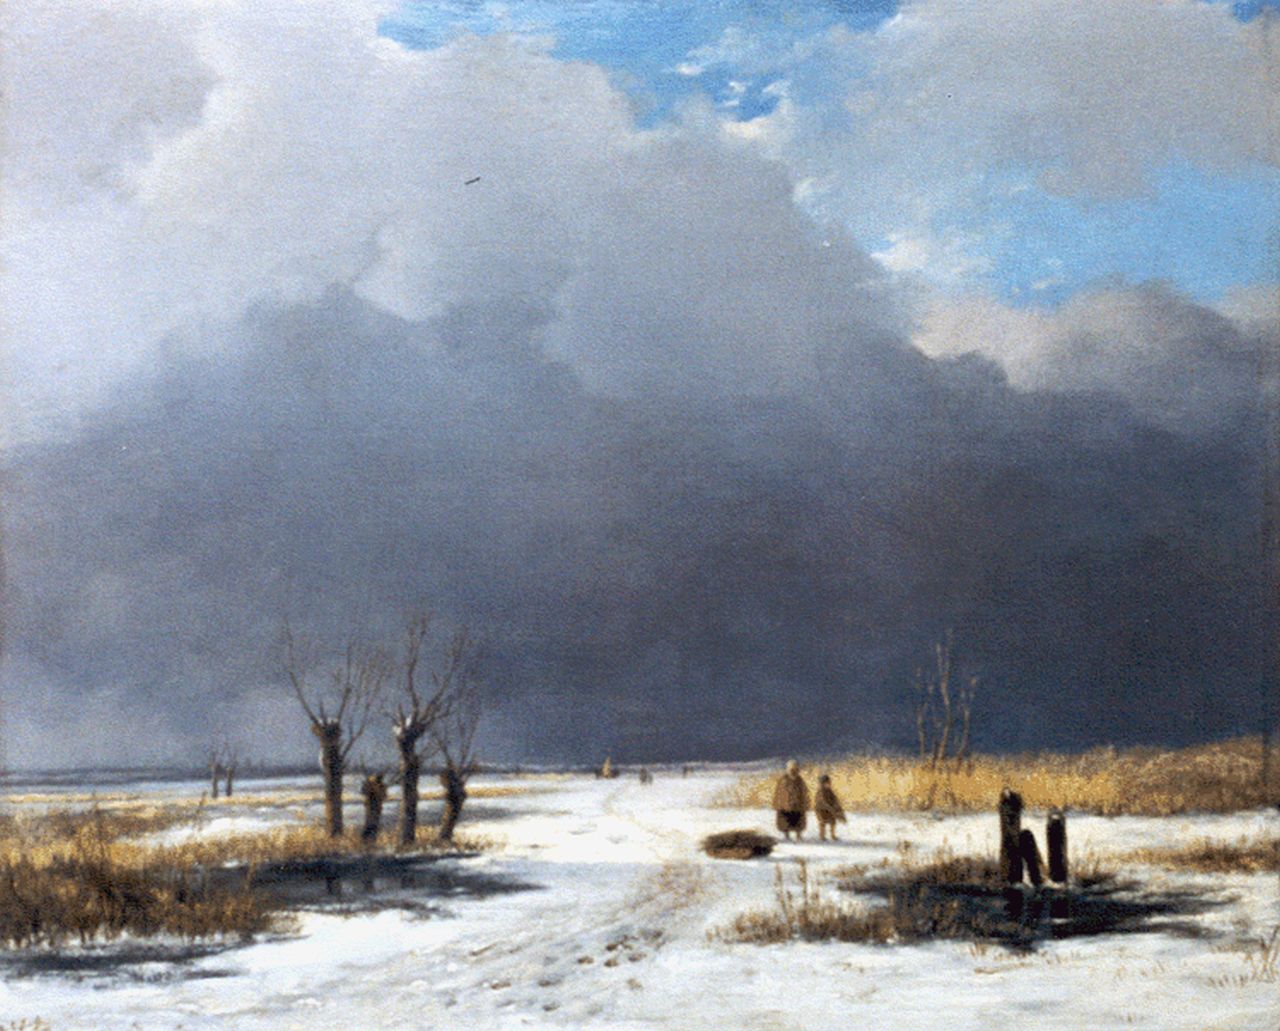 Schneiders van Greyffenswerth B.C.  | Bonifacius Cornelis Schneiders van Greyffenswerth, Figures in a winter landscape, oil on panel 26.3 x 31.8 cm, signed l.l. with initials and dated 1834